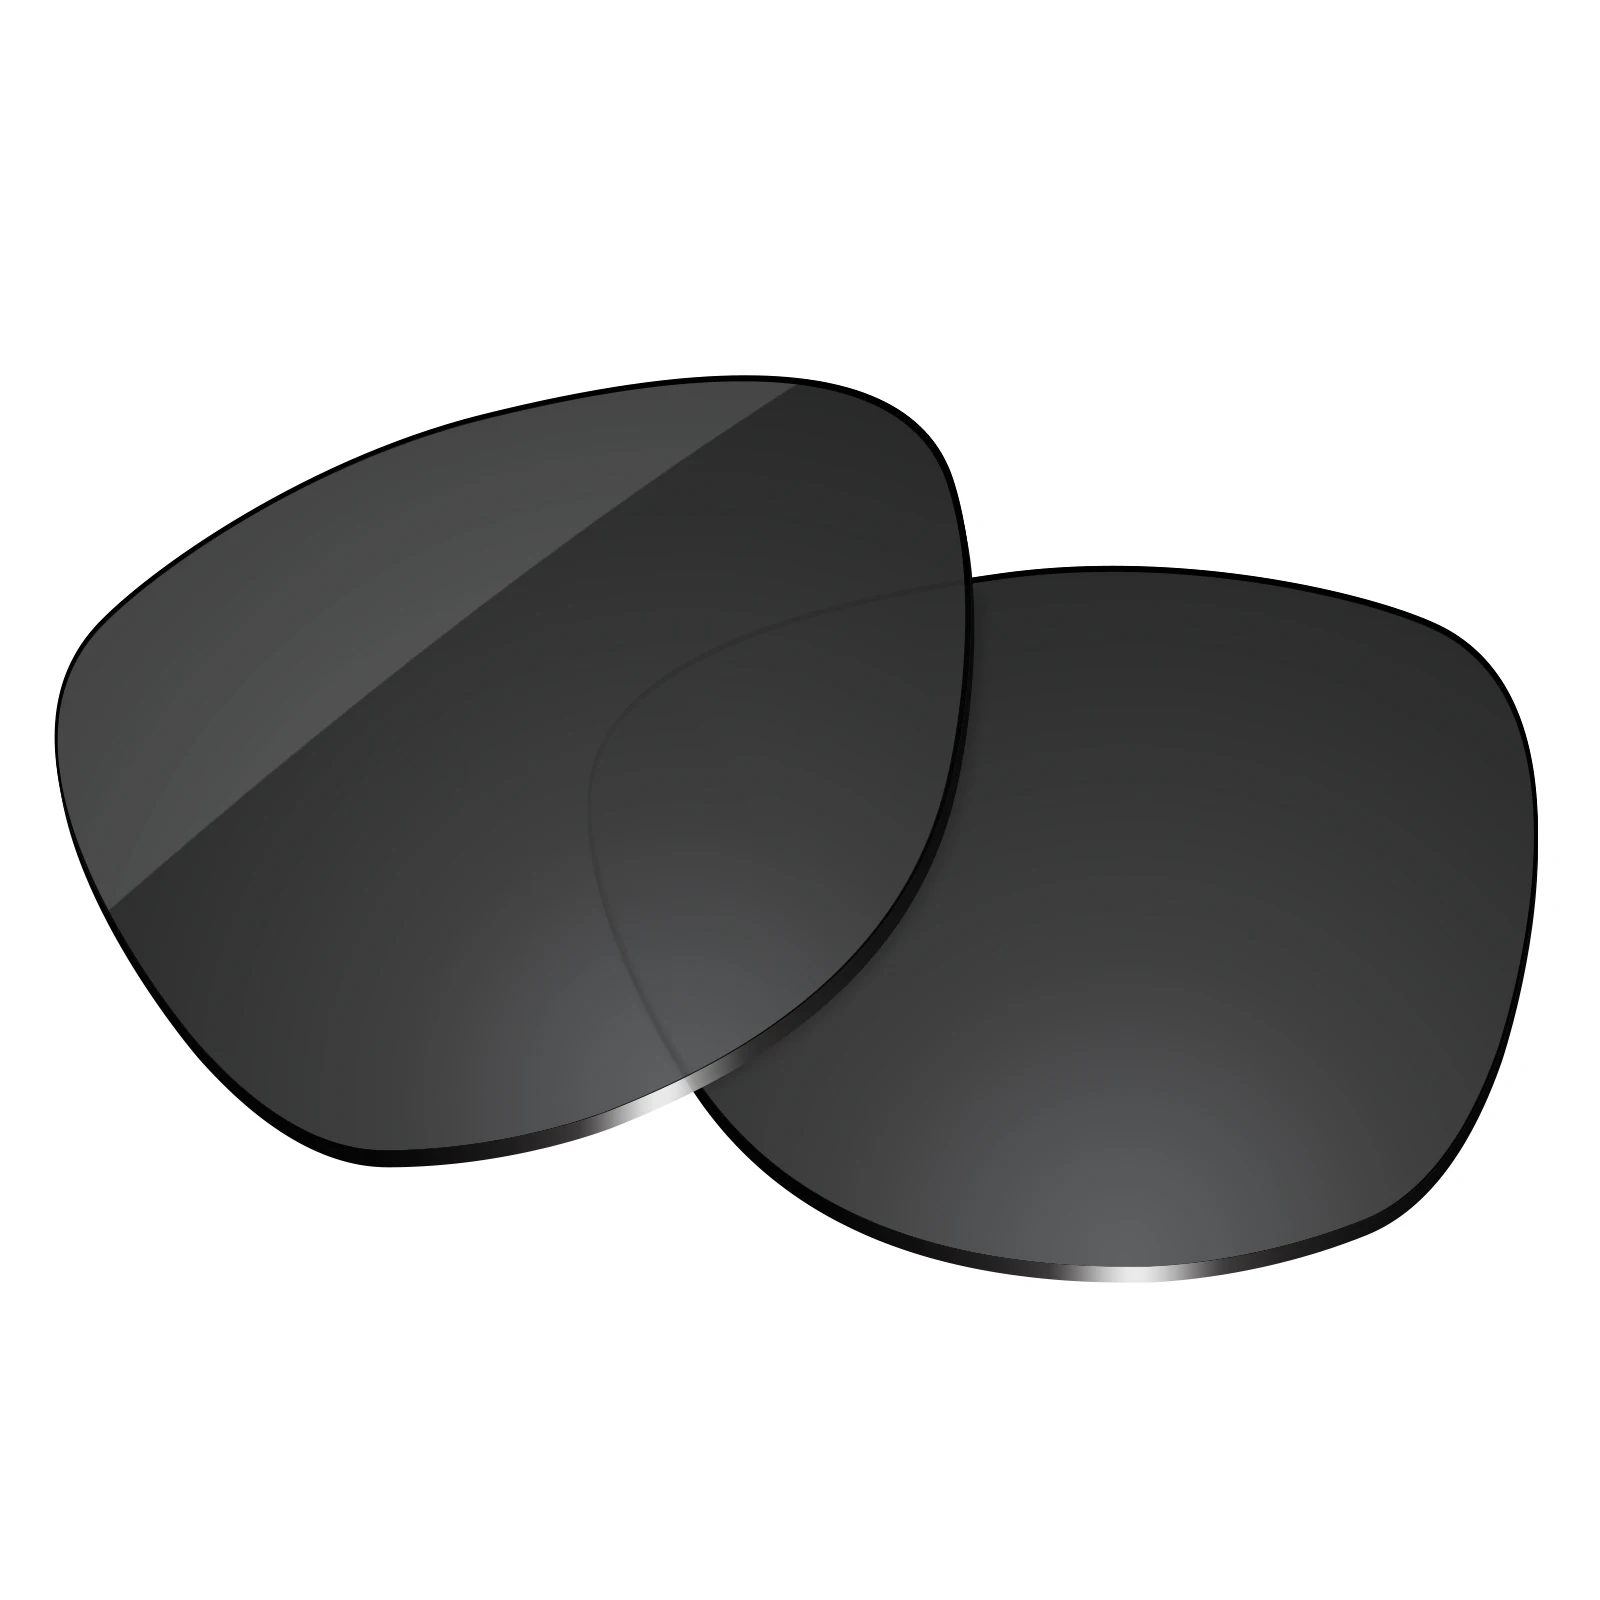 

OOWLIT Polarized Replacement Lenses for-Smith Monterey Sunglasses (Lens Only)